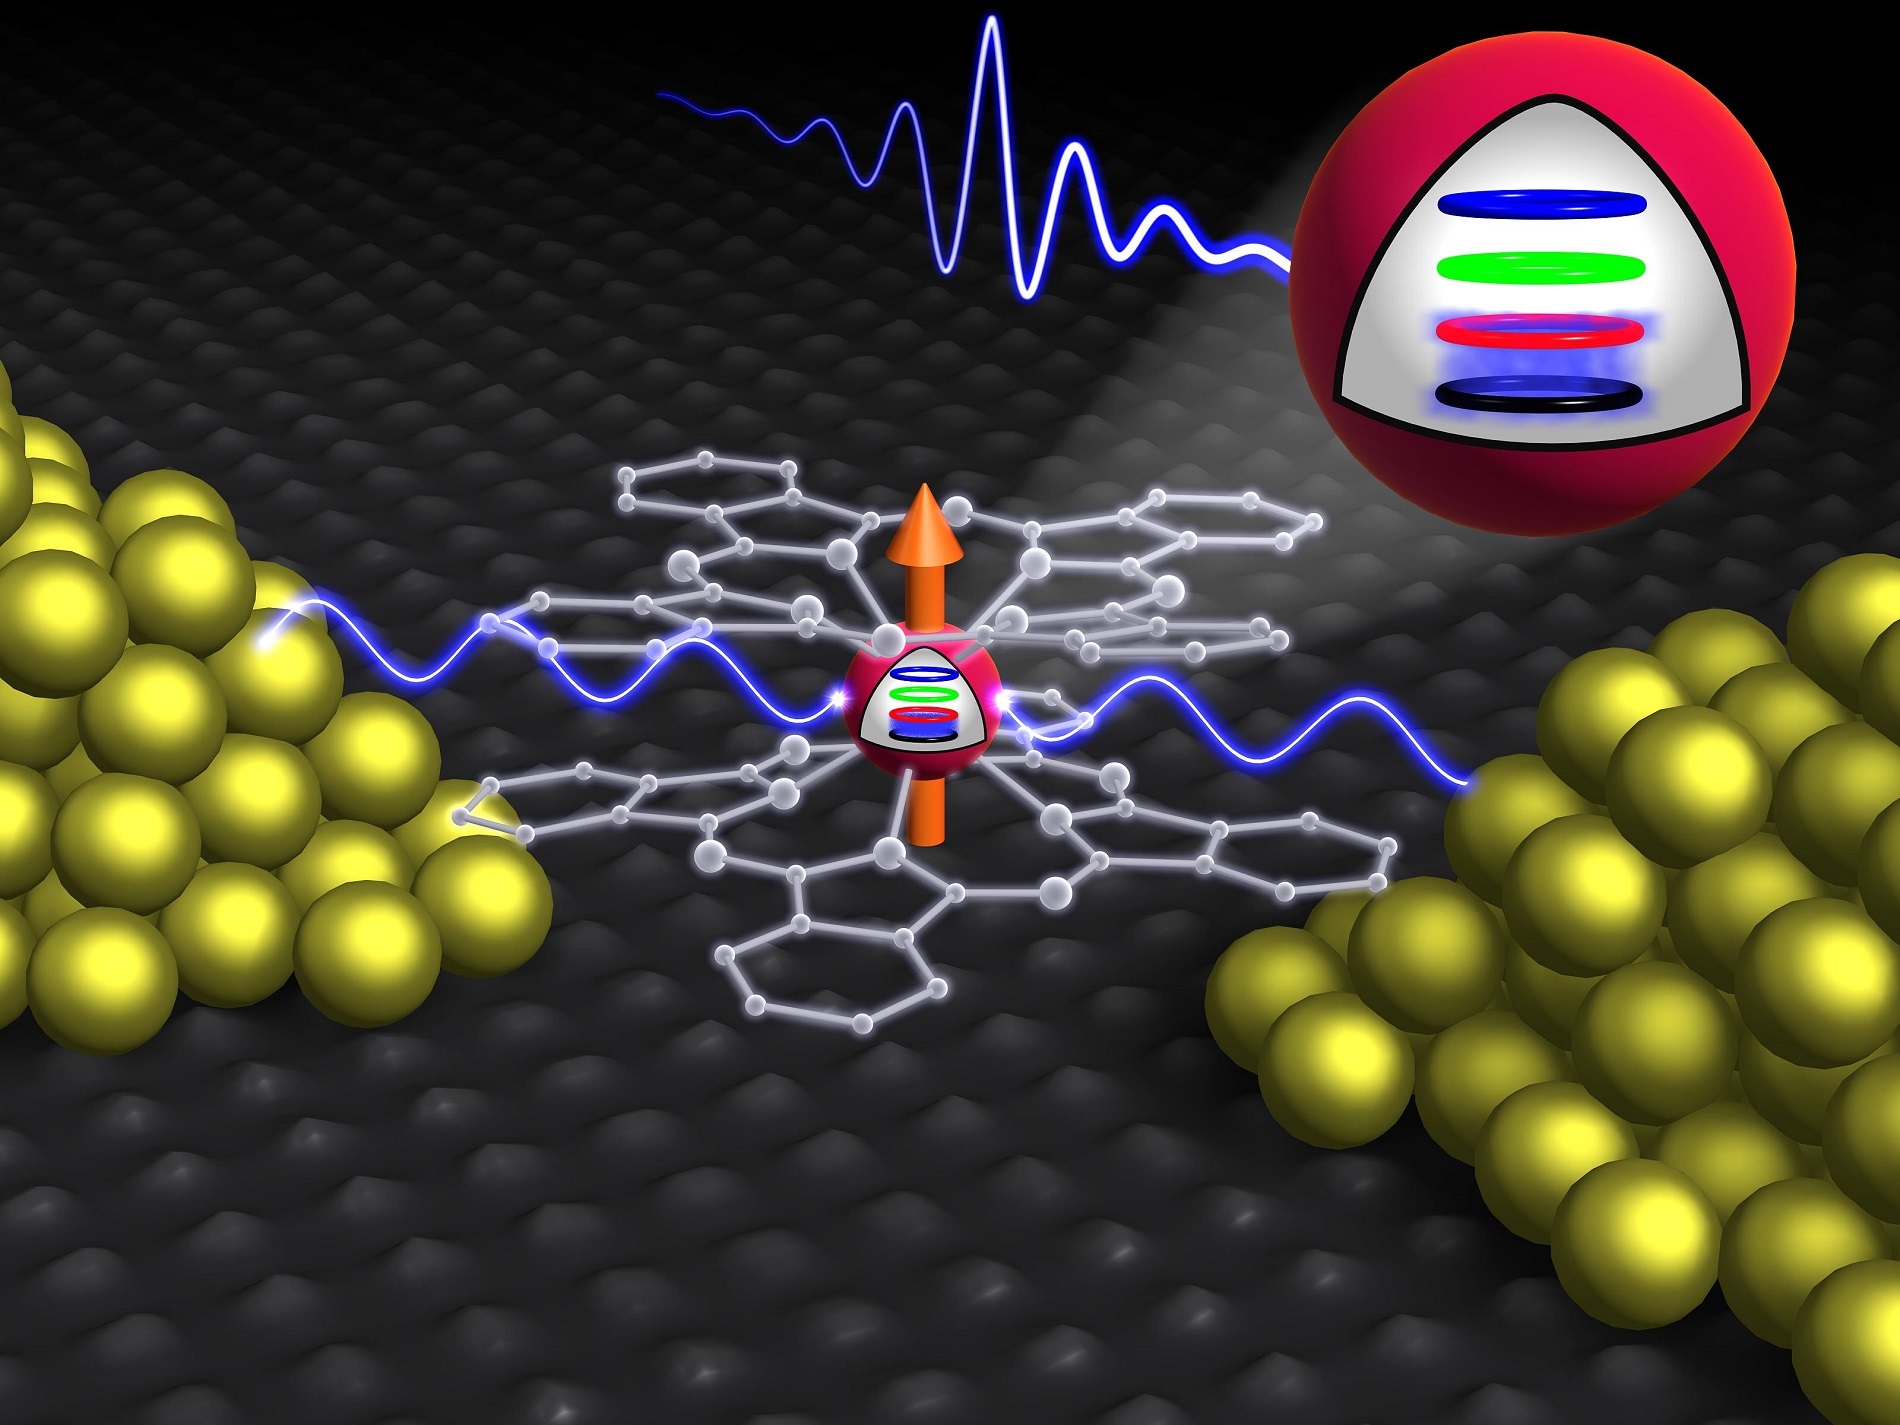 Upon execution of Grover’s quantum algorithm, the terbium single-molecule transistor reads out unsorted databases